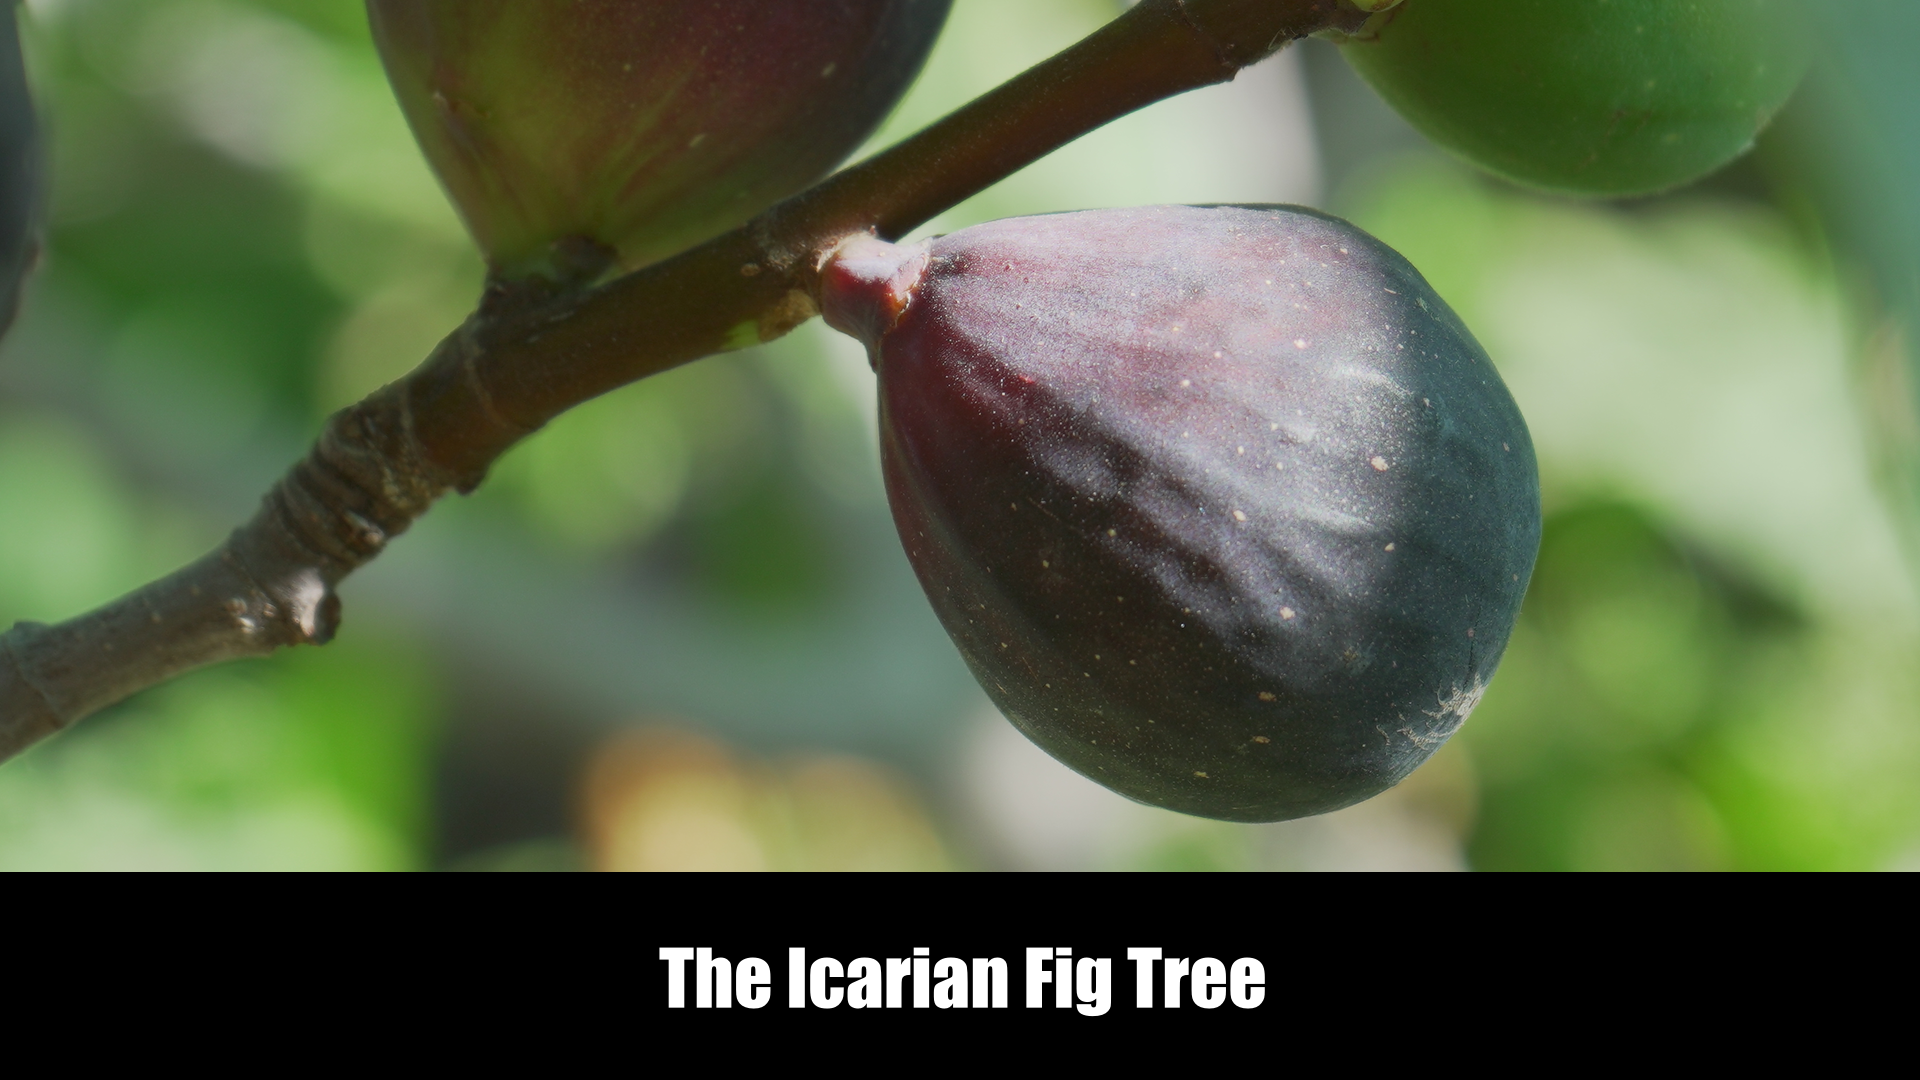 The Icarian Fig Tree image